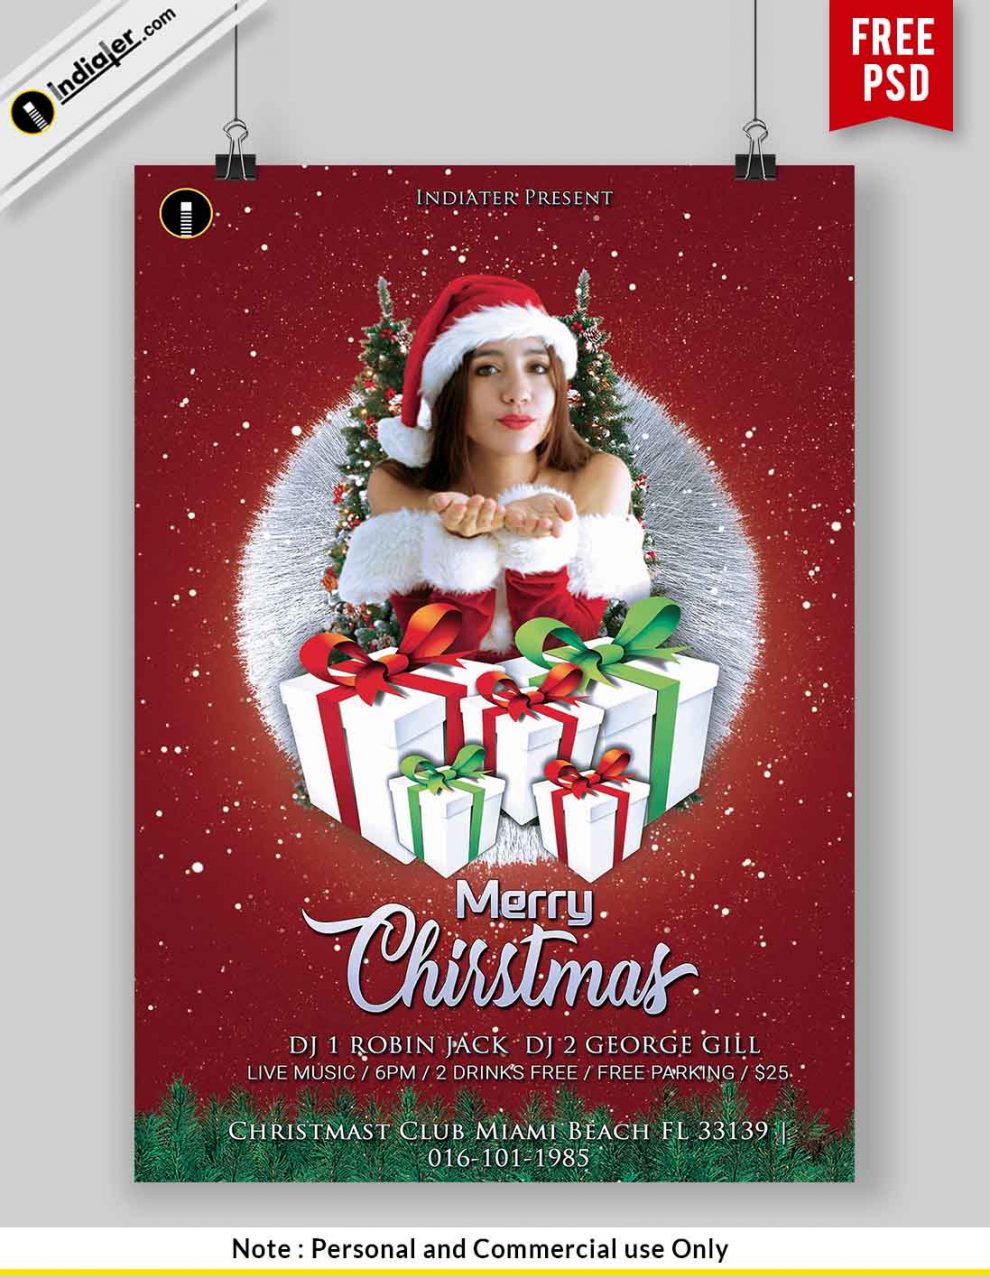 Download Free Christmas Flyer Psd Templates For Print Indiater